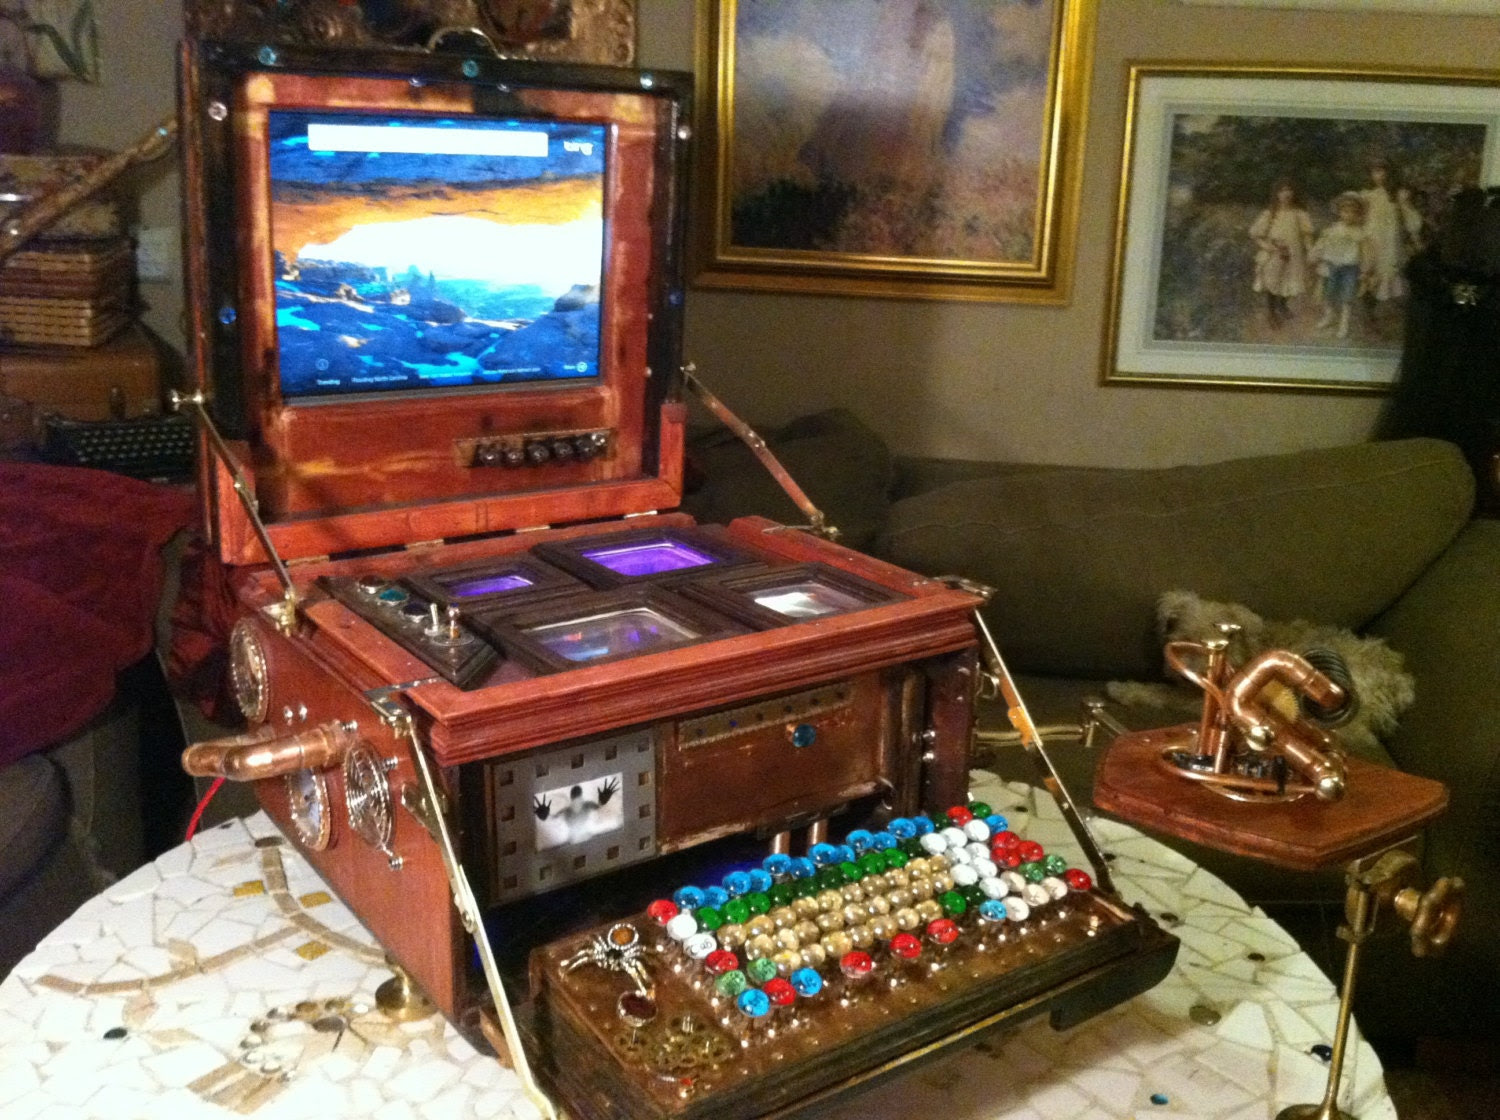 Lady Victoria - Post Apocalyptic Steampunk Computer - RagsGower